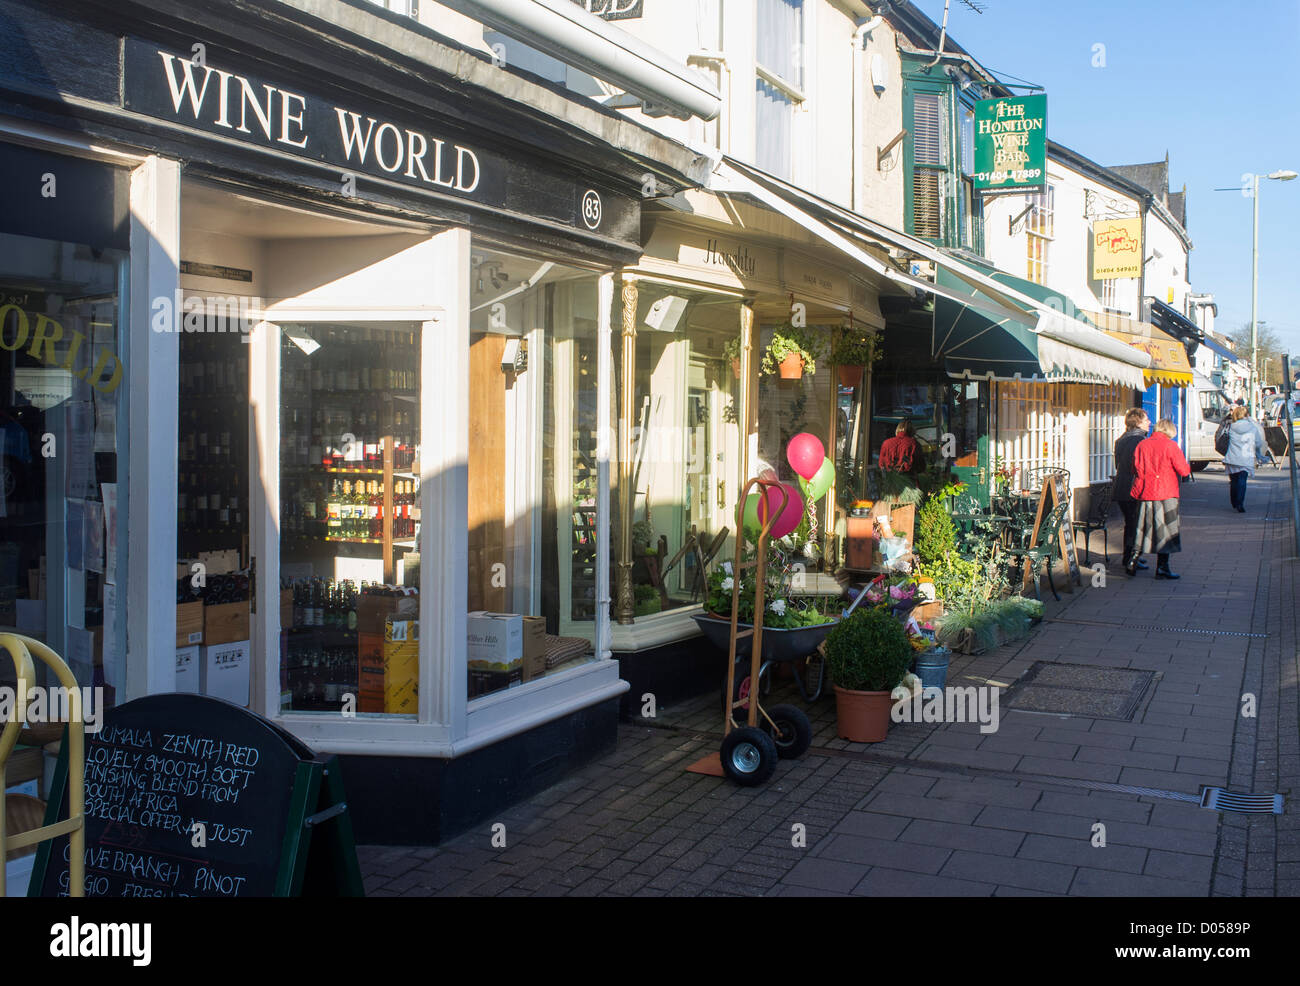 Honiton Devon England. October 14th 2012. Honiton hight street with Wine World in the foreground. Stock Photo